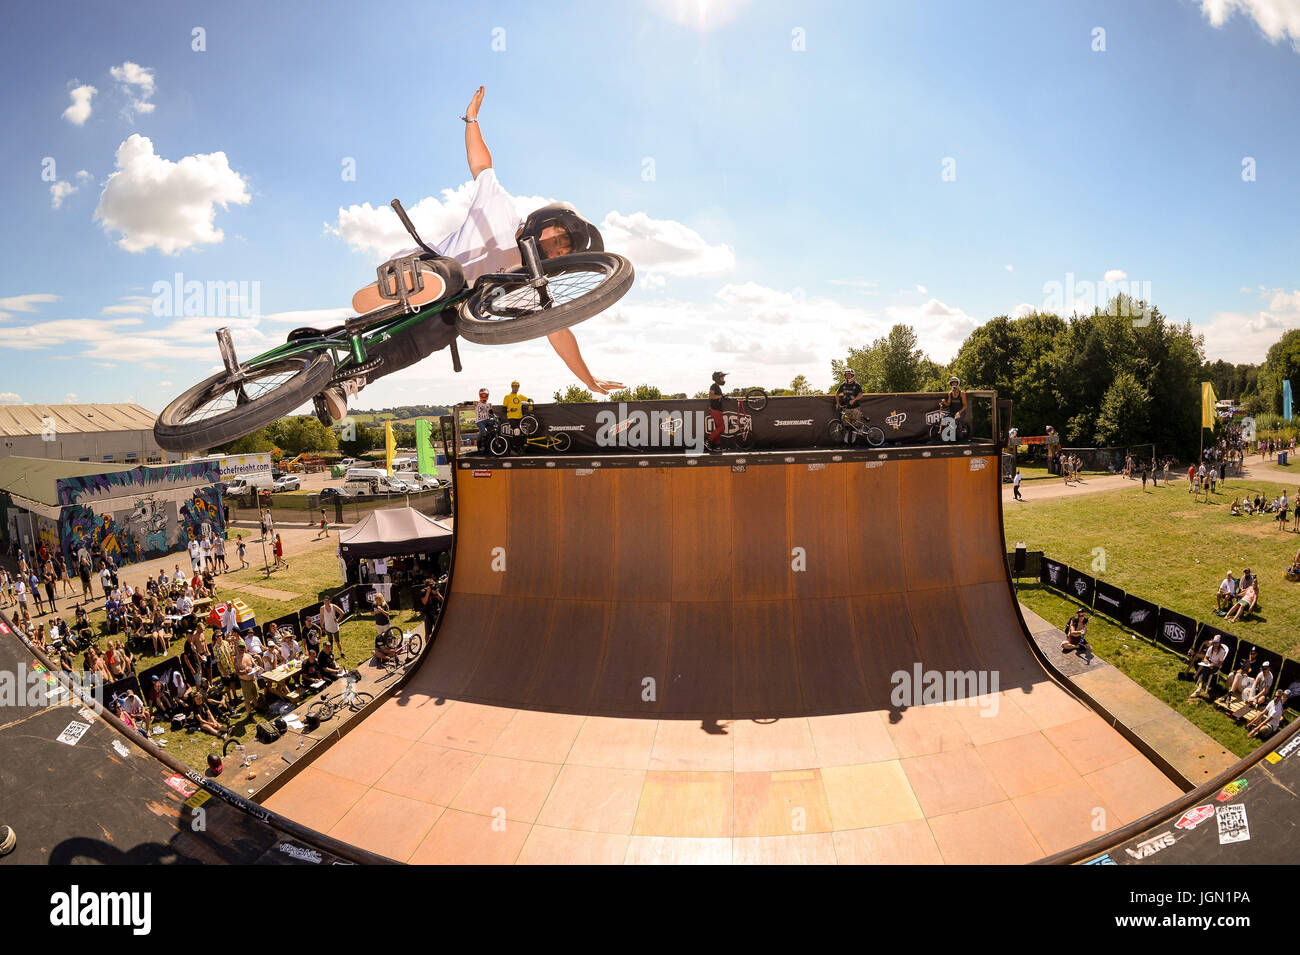 BMX'ers perform tricks during the BMX World Championships during the NASS Festival 2017 at the Royal Bath & West Showground in Shepton Mallet, Somerset. Stock Photo